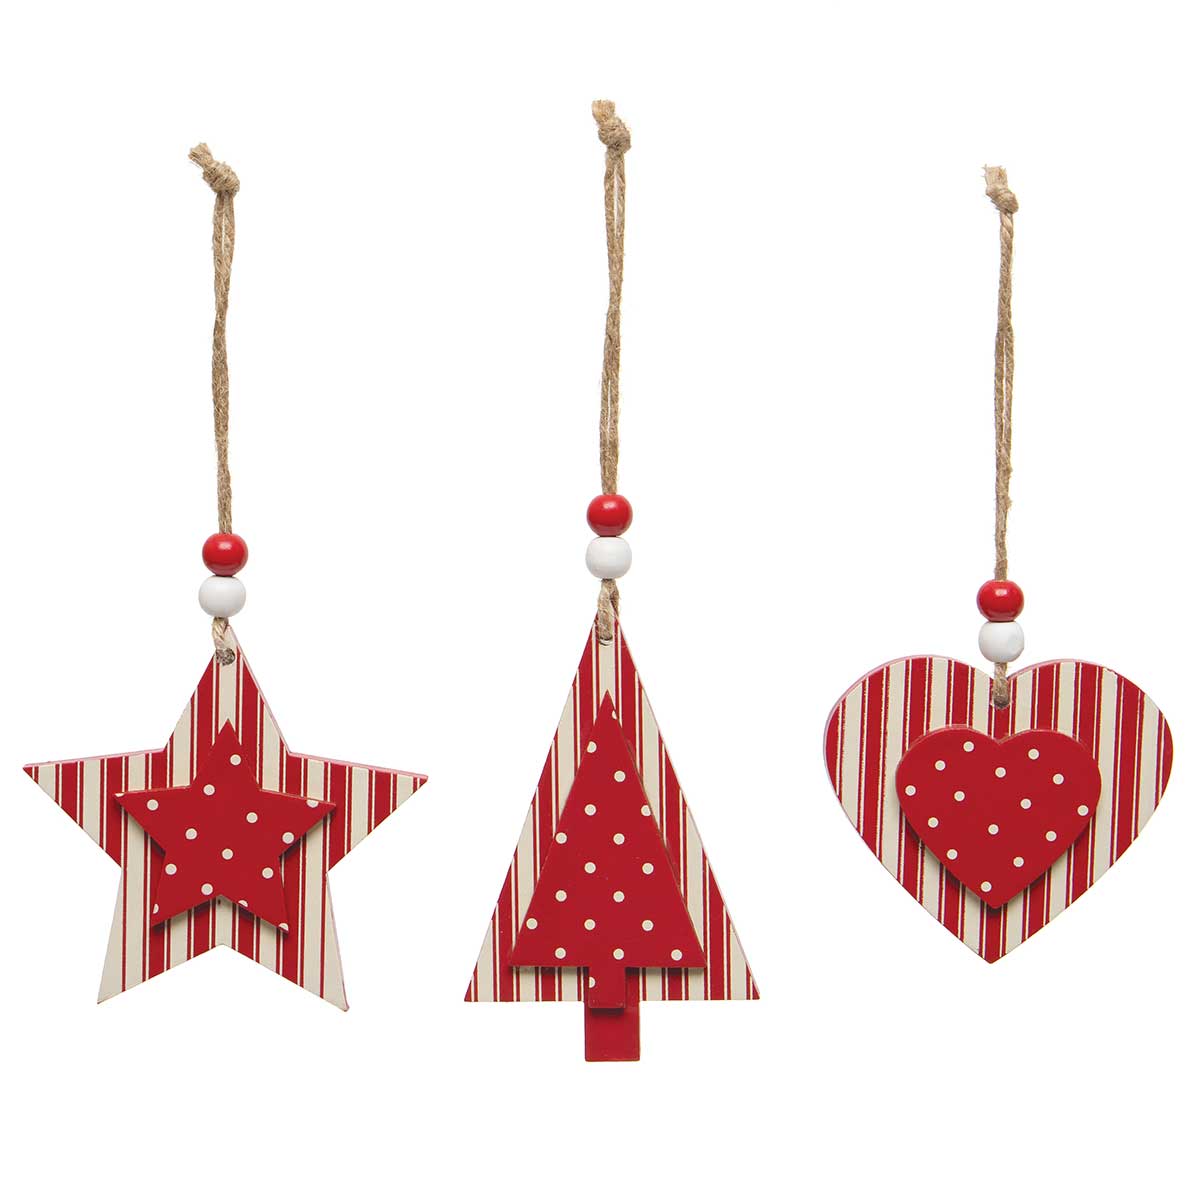 Ticking Wood Ornament Red/Cream Heart/Star/Tree Set of 3